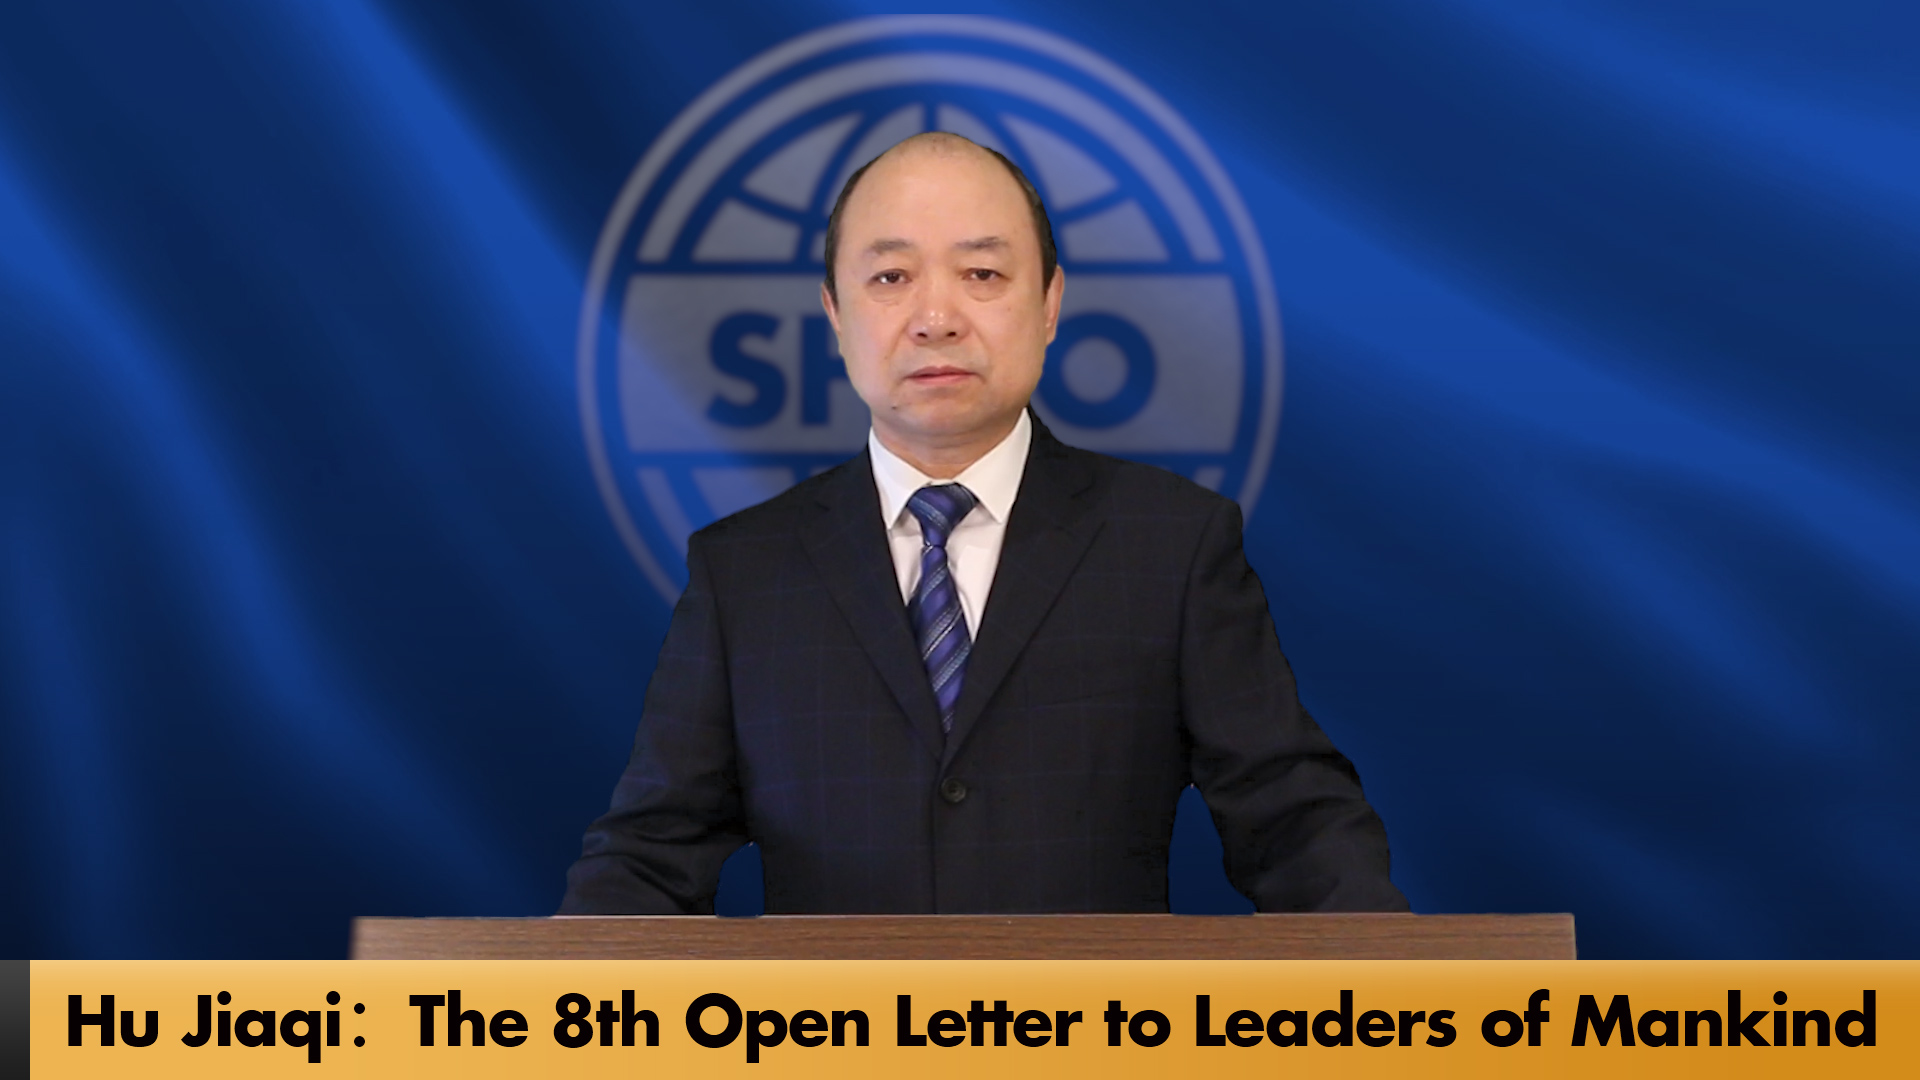 The 8th Open Letter to Leaders of Mankind